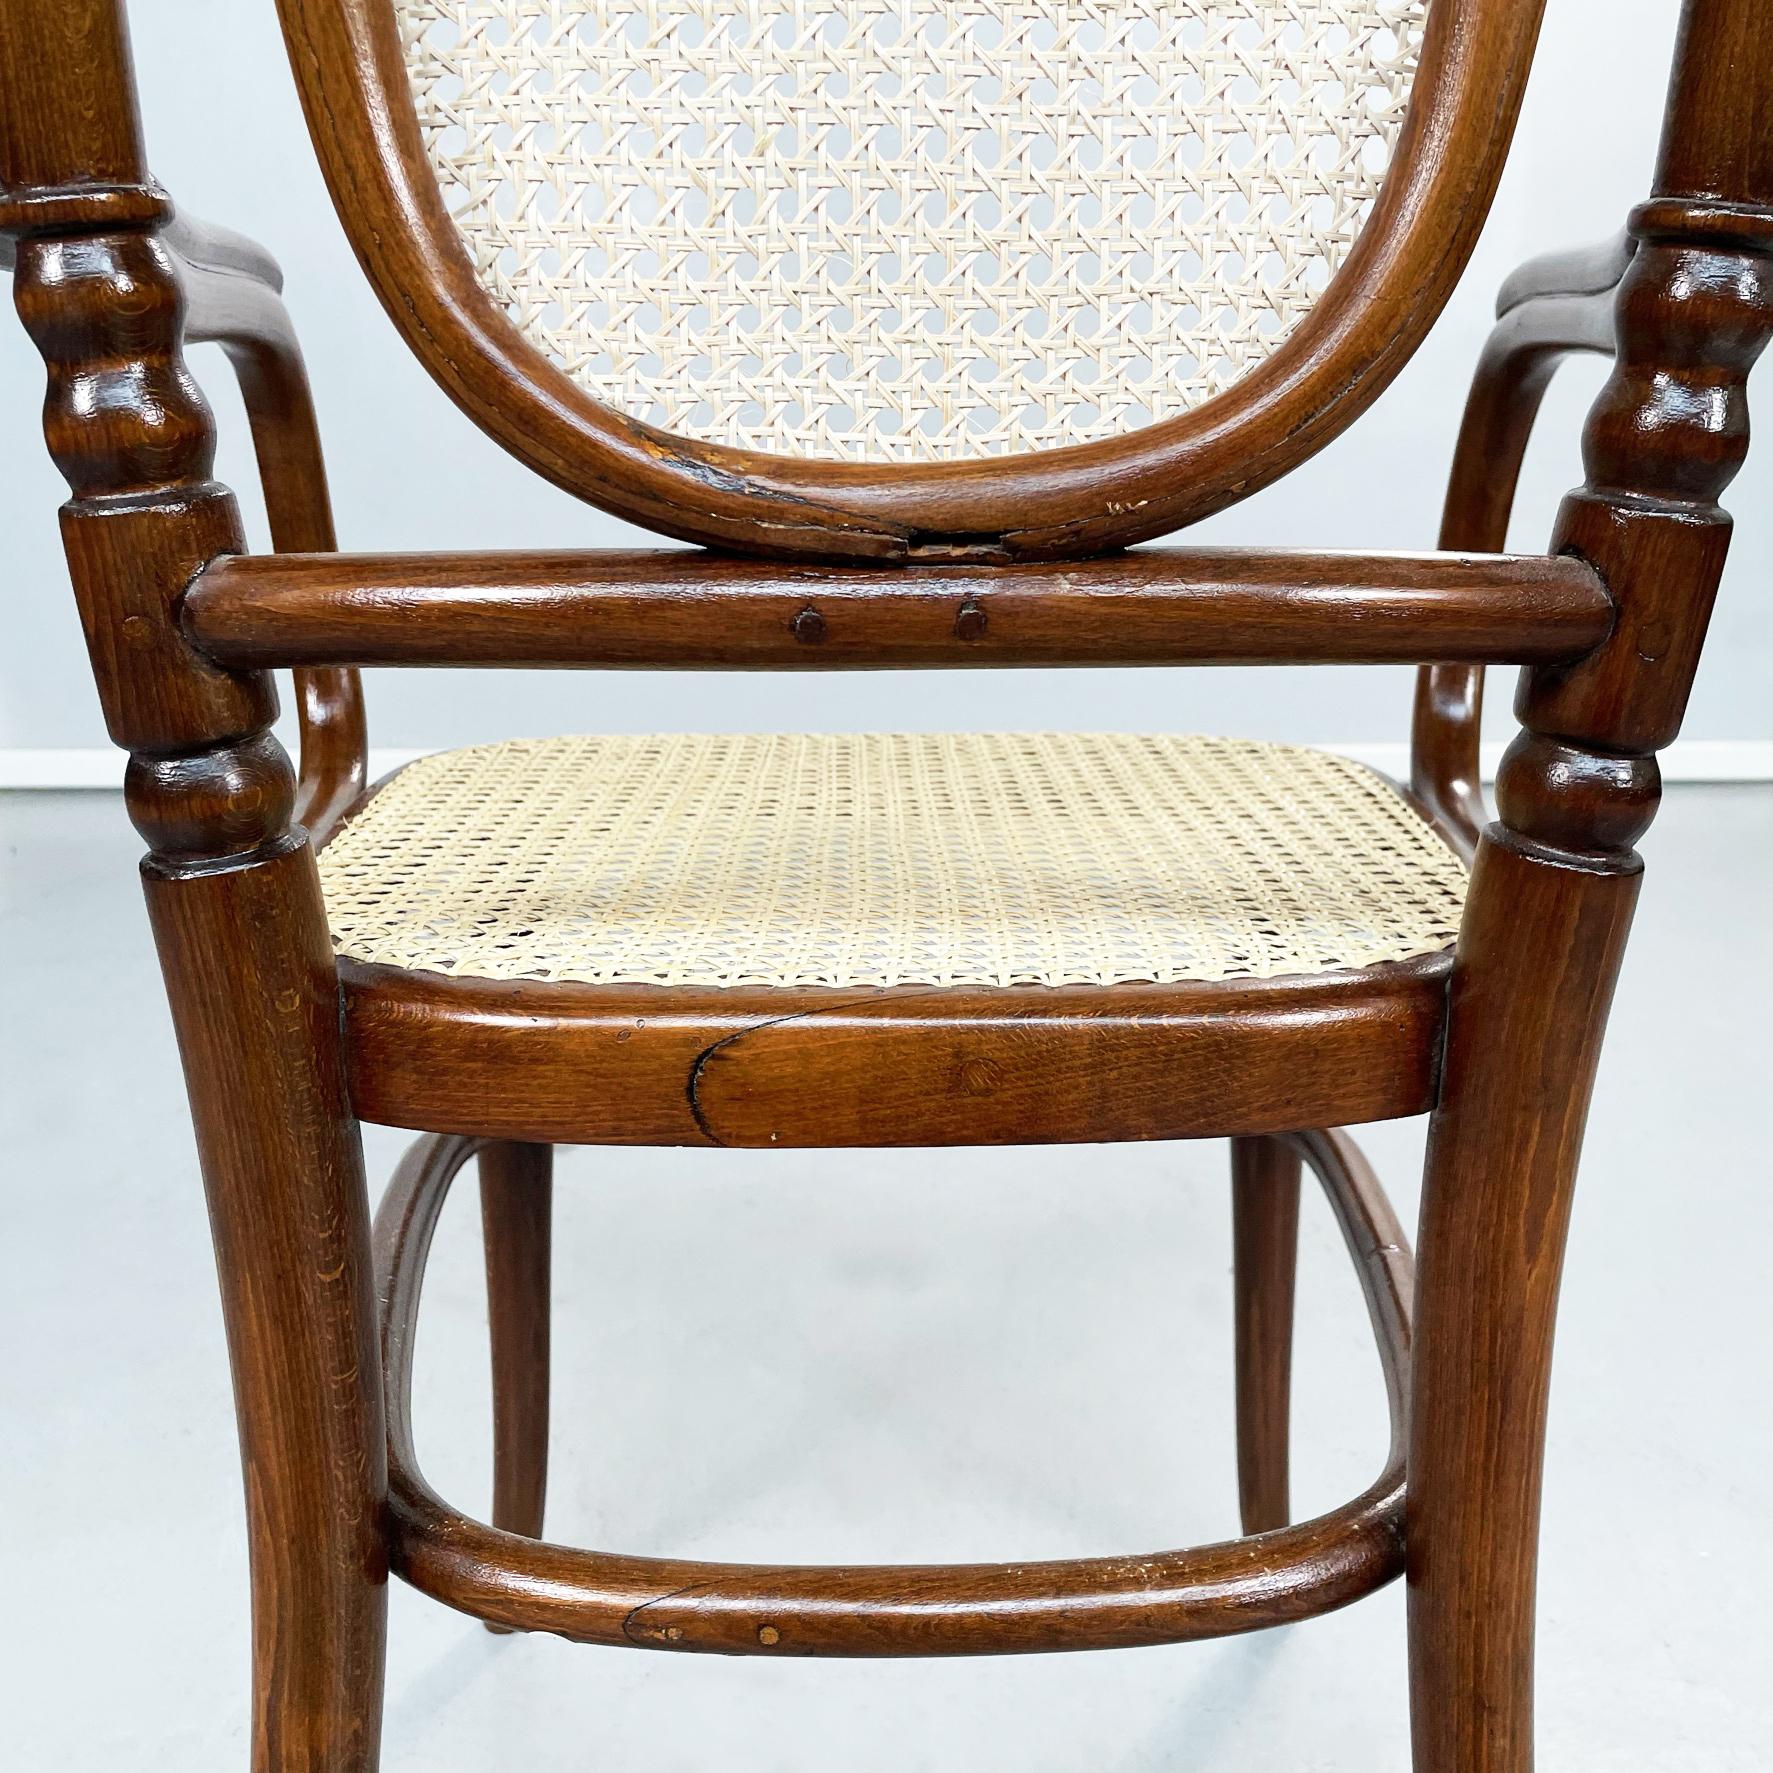 Austrian Chairs with Straw and Wood by Thonet, 1900s For Sale 9